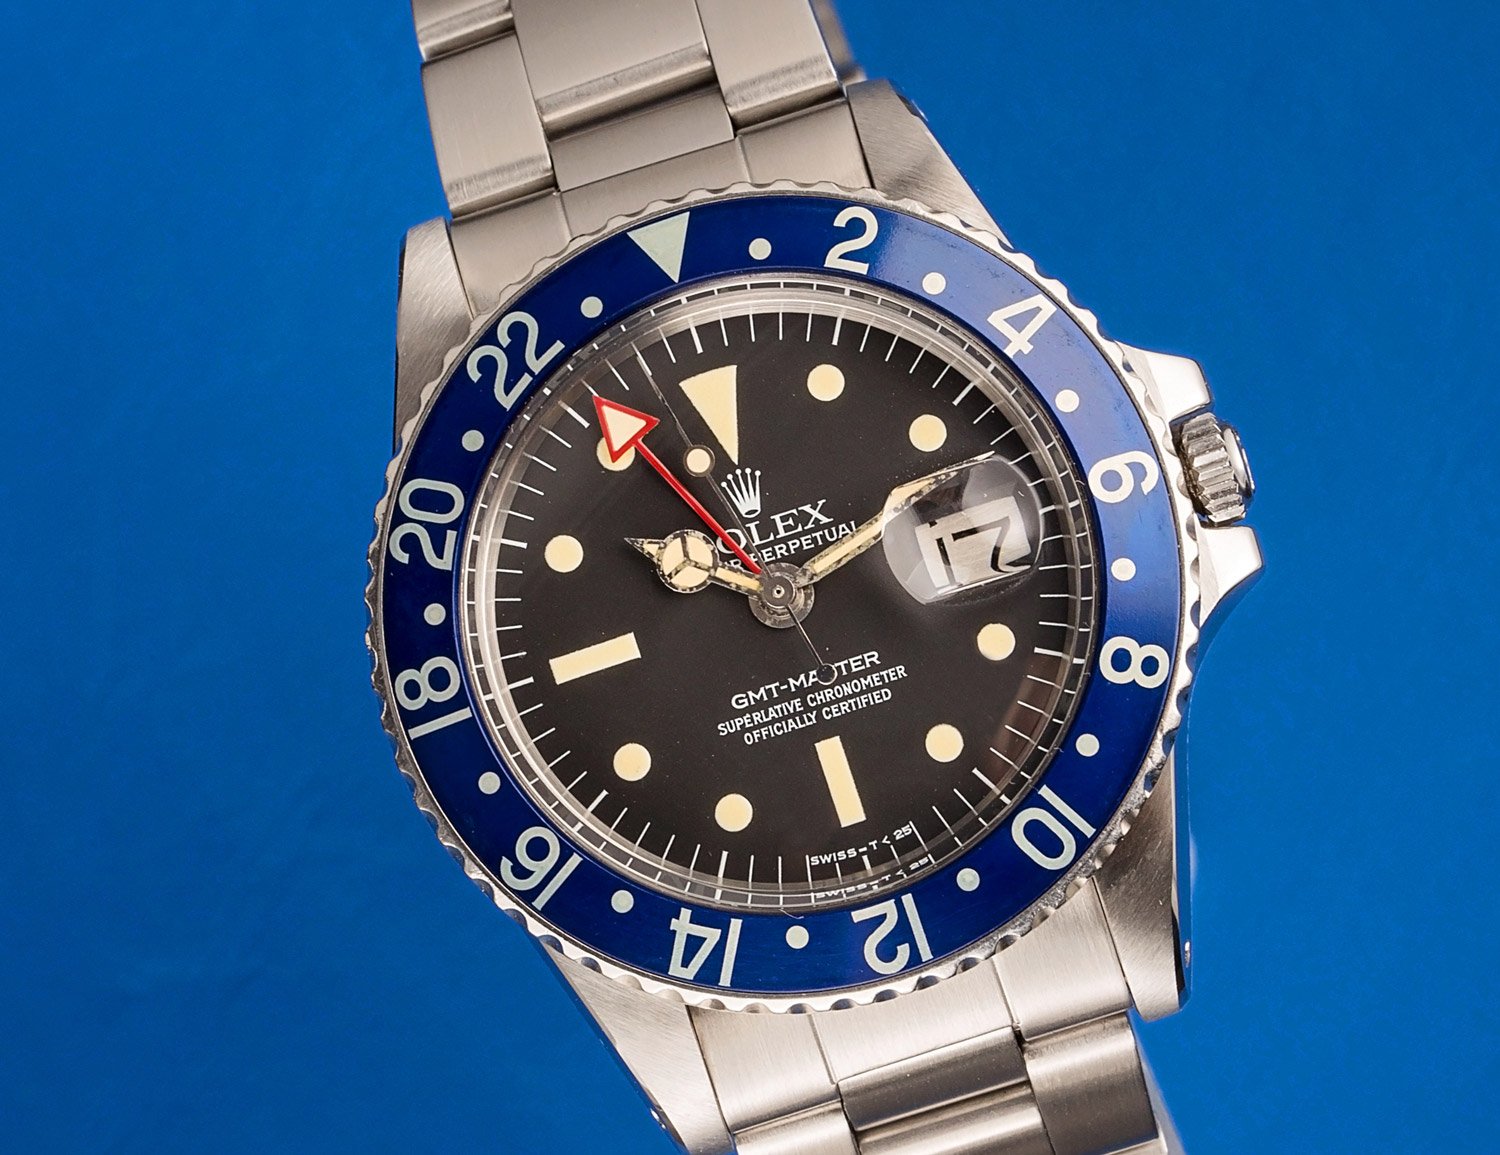 The Rolex GMT Blueberry Reference 1675 